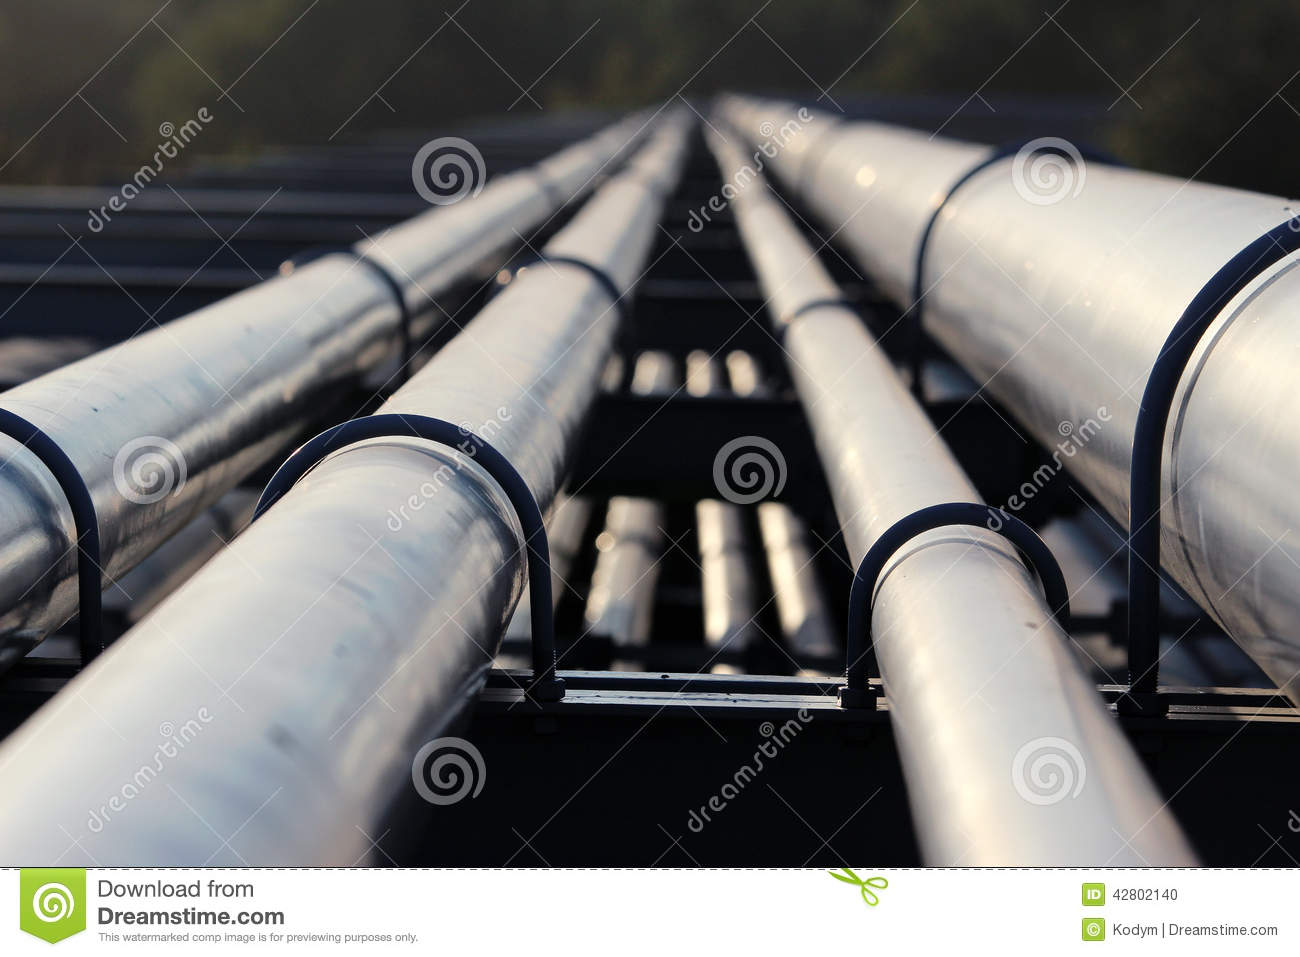 Crude Oil Pipeline Transportation To Refinery Stock Photo   Image